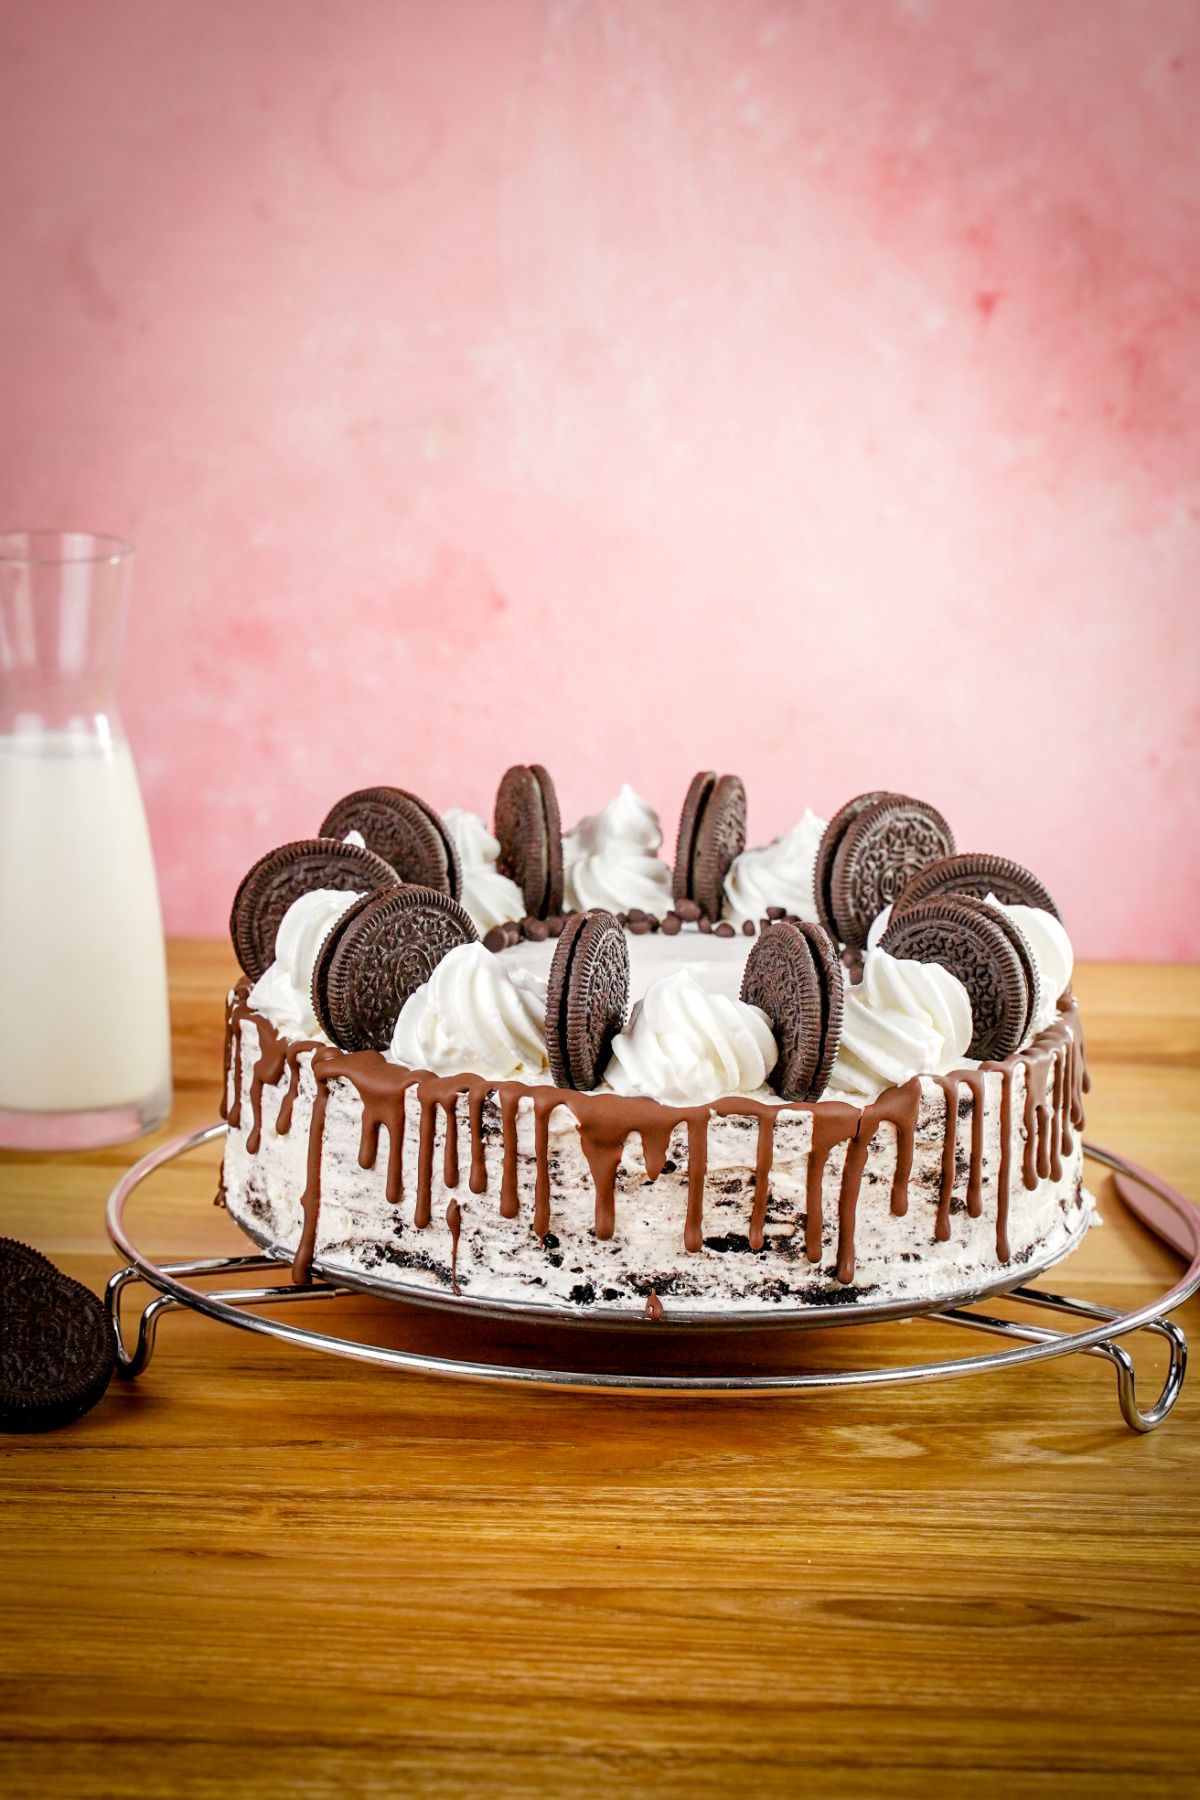 4 Ingredient Oreo Icebox Cake nicely decorated with oreos and place on a fancy plater